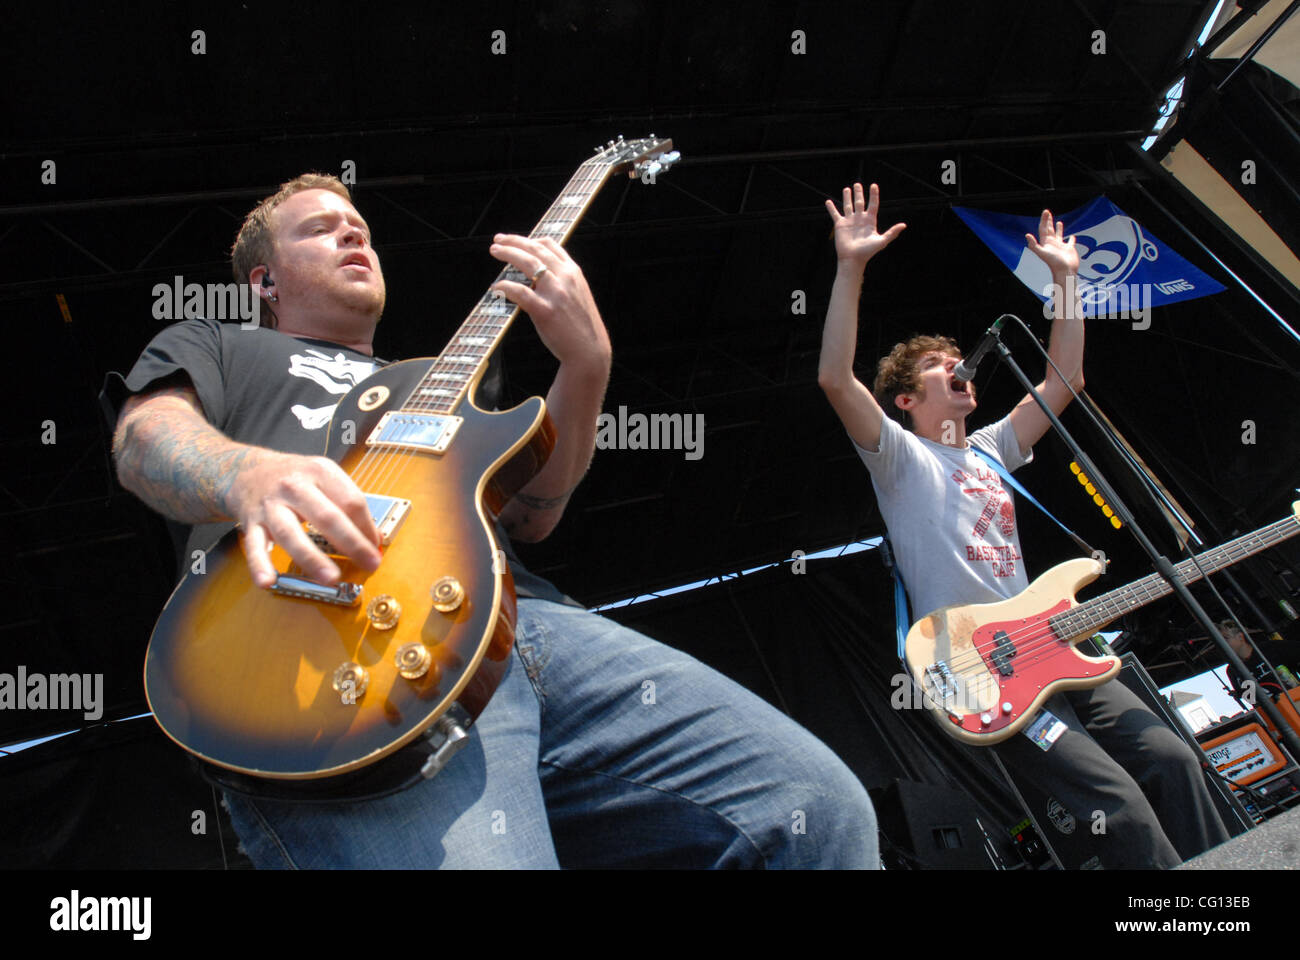 Jul. 23, 2007; Charlotte, NC USA; Guitarist MIKE GOLLA and Singer / Bass Guitarist KENNY VOSOLI of the band The Starting Line performs live as part of the 13th annual Vans Warped Tour that took place at the Verizon Wireless Amphitheater located in Charlotte. Mandatory Credit: Photo by Jason Moore (© Stock Photo